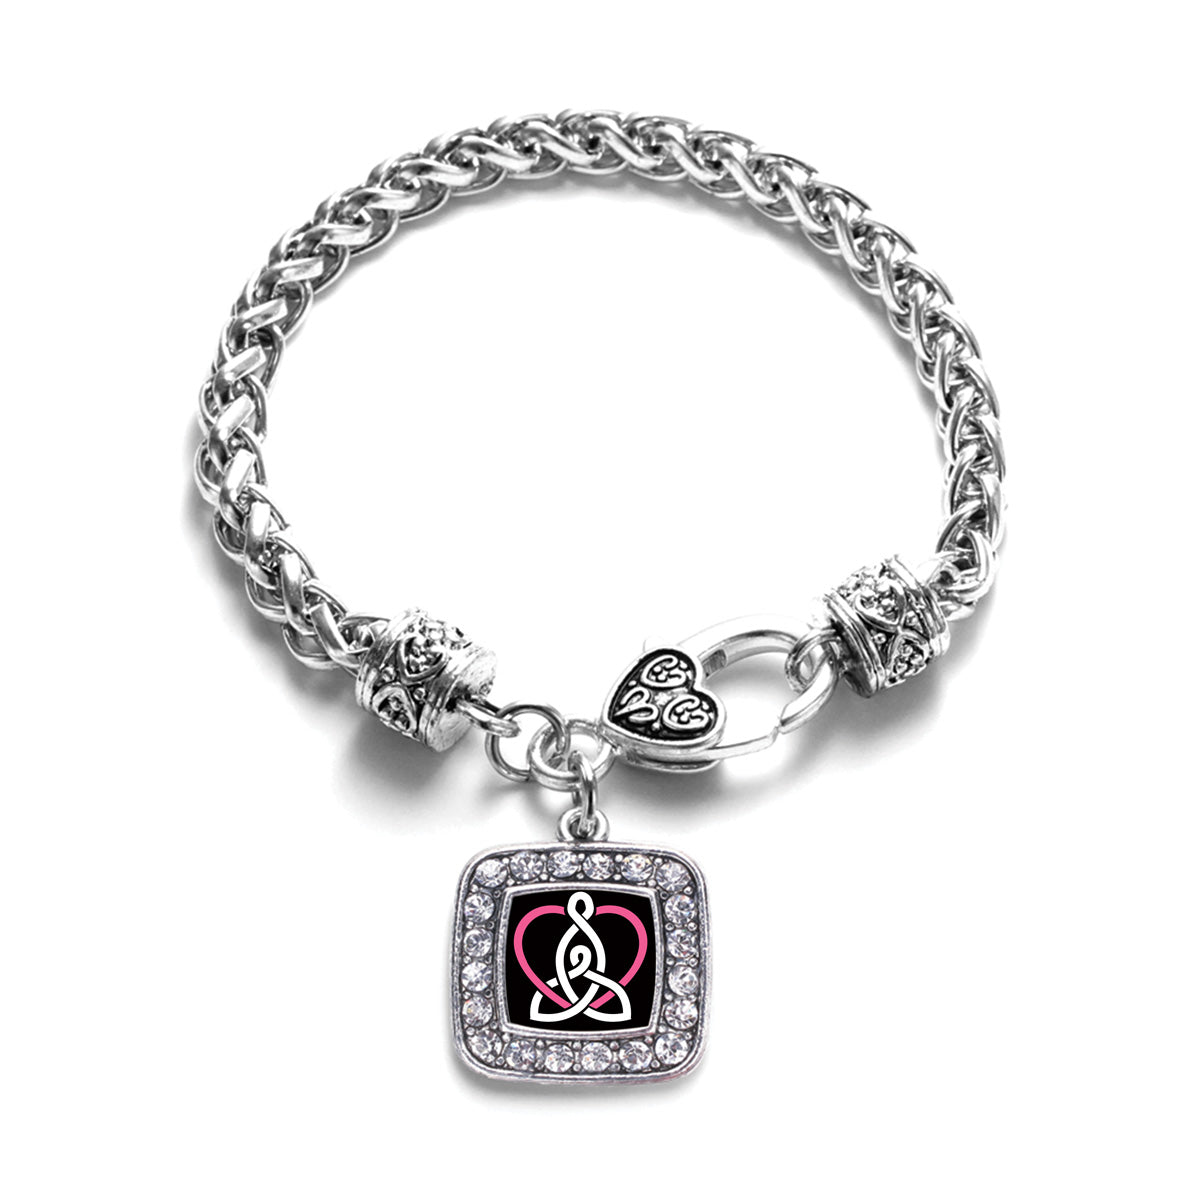 Silver Mother and Daughter Celtic Knot Square Charm Braided Bracelet